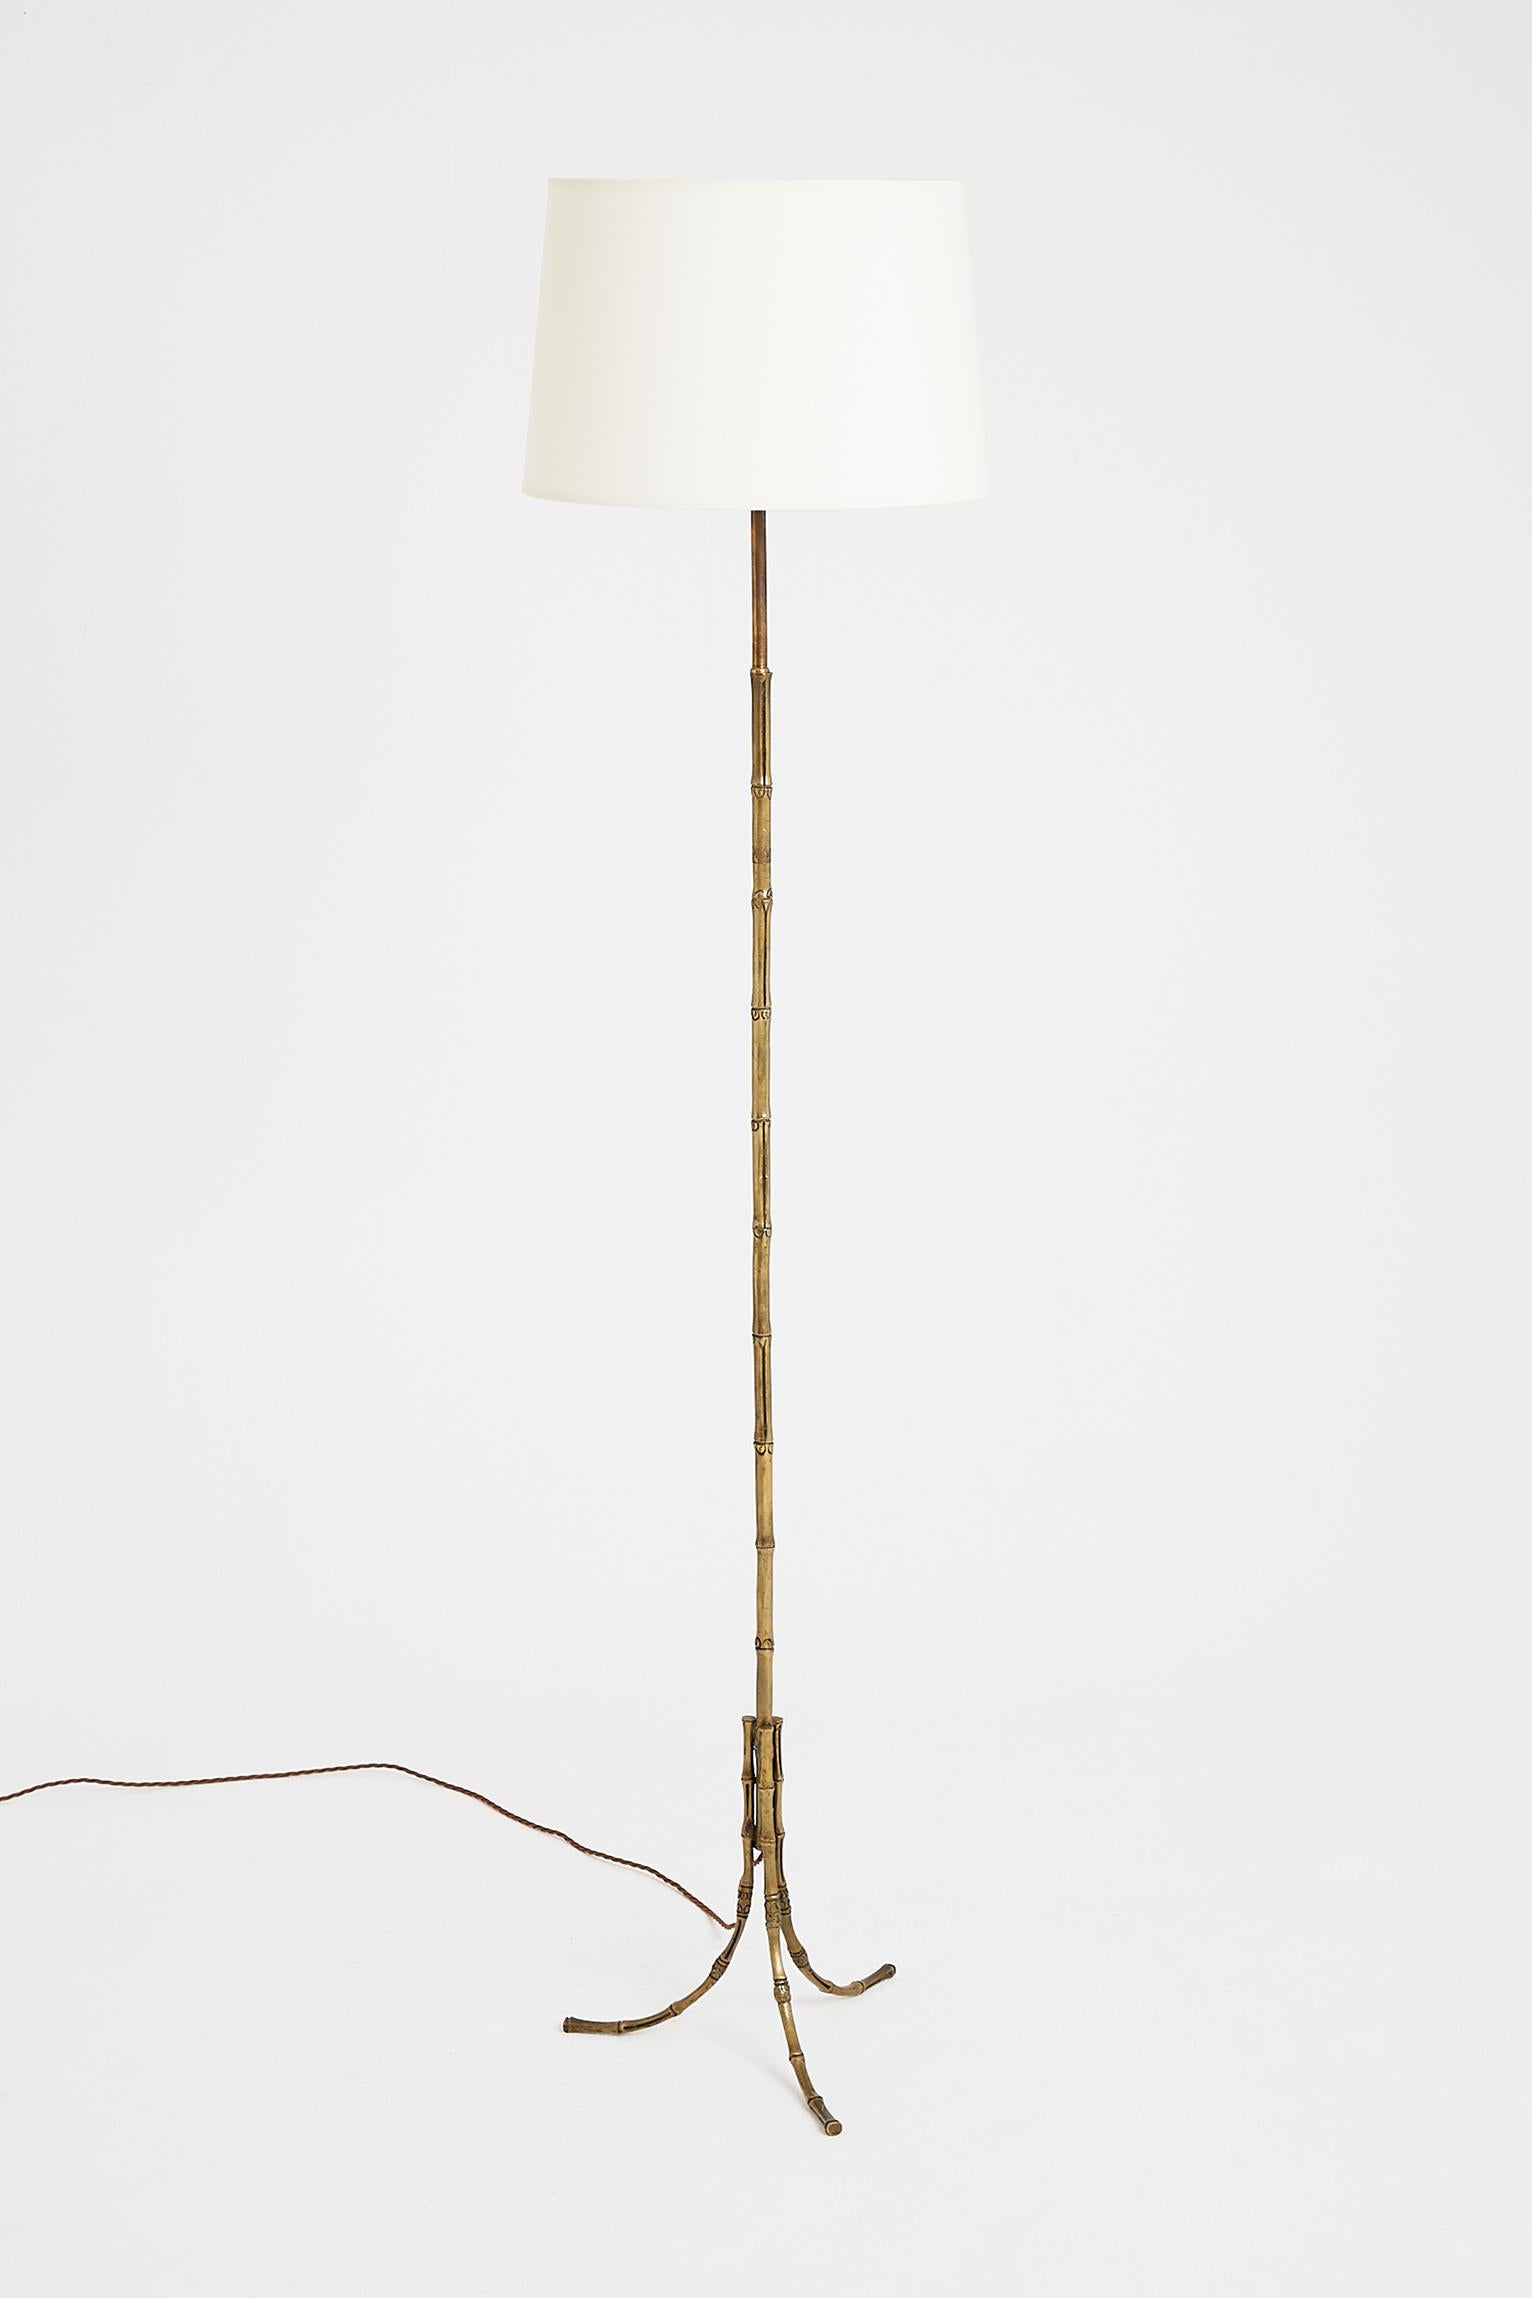 floor lamp stands only